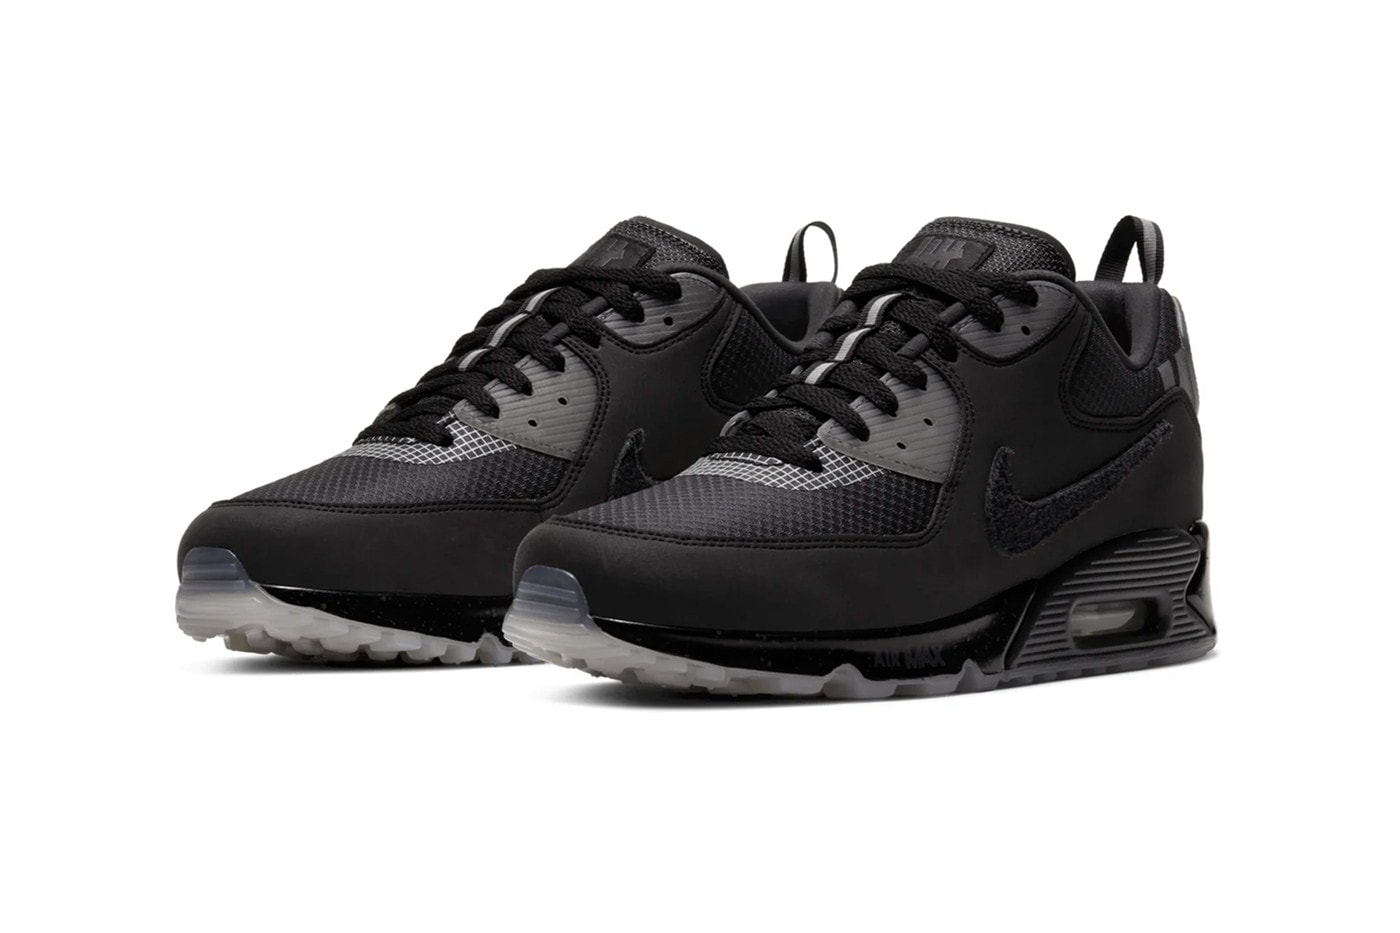 Photo UNDEFEATED x Nike Air Max 90 "Black"